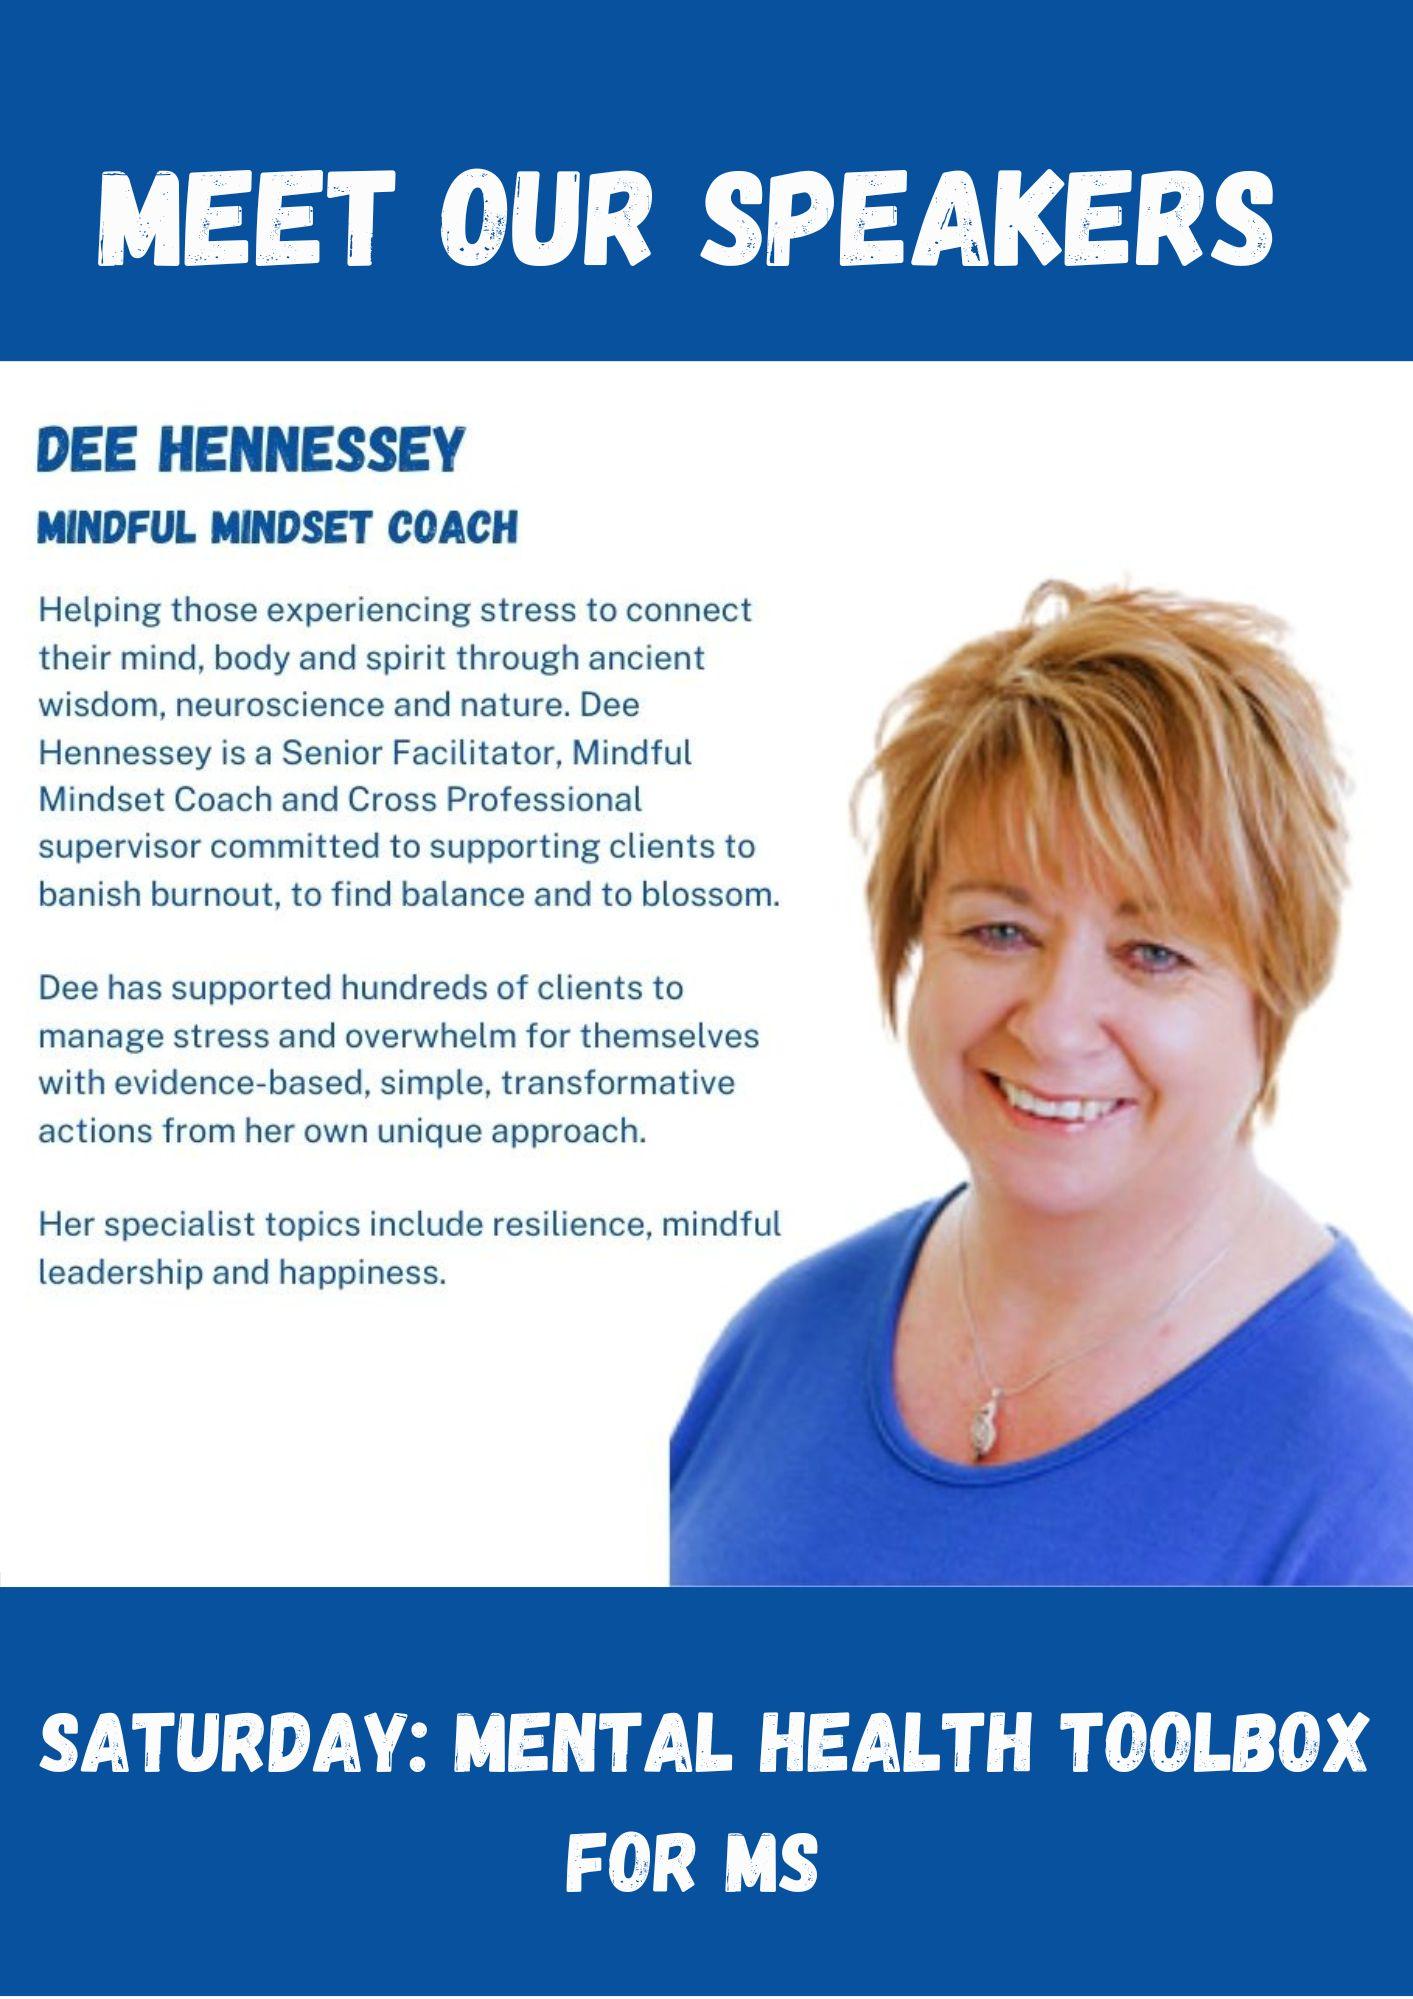 Image of Dee Hennessy with blue text on white background